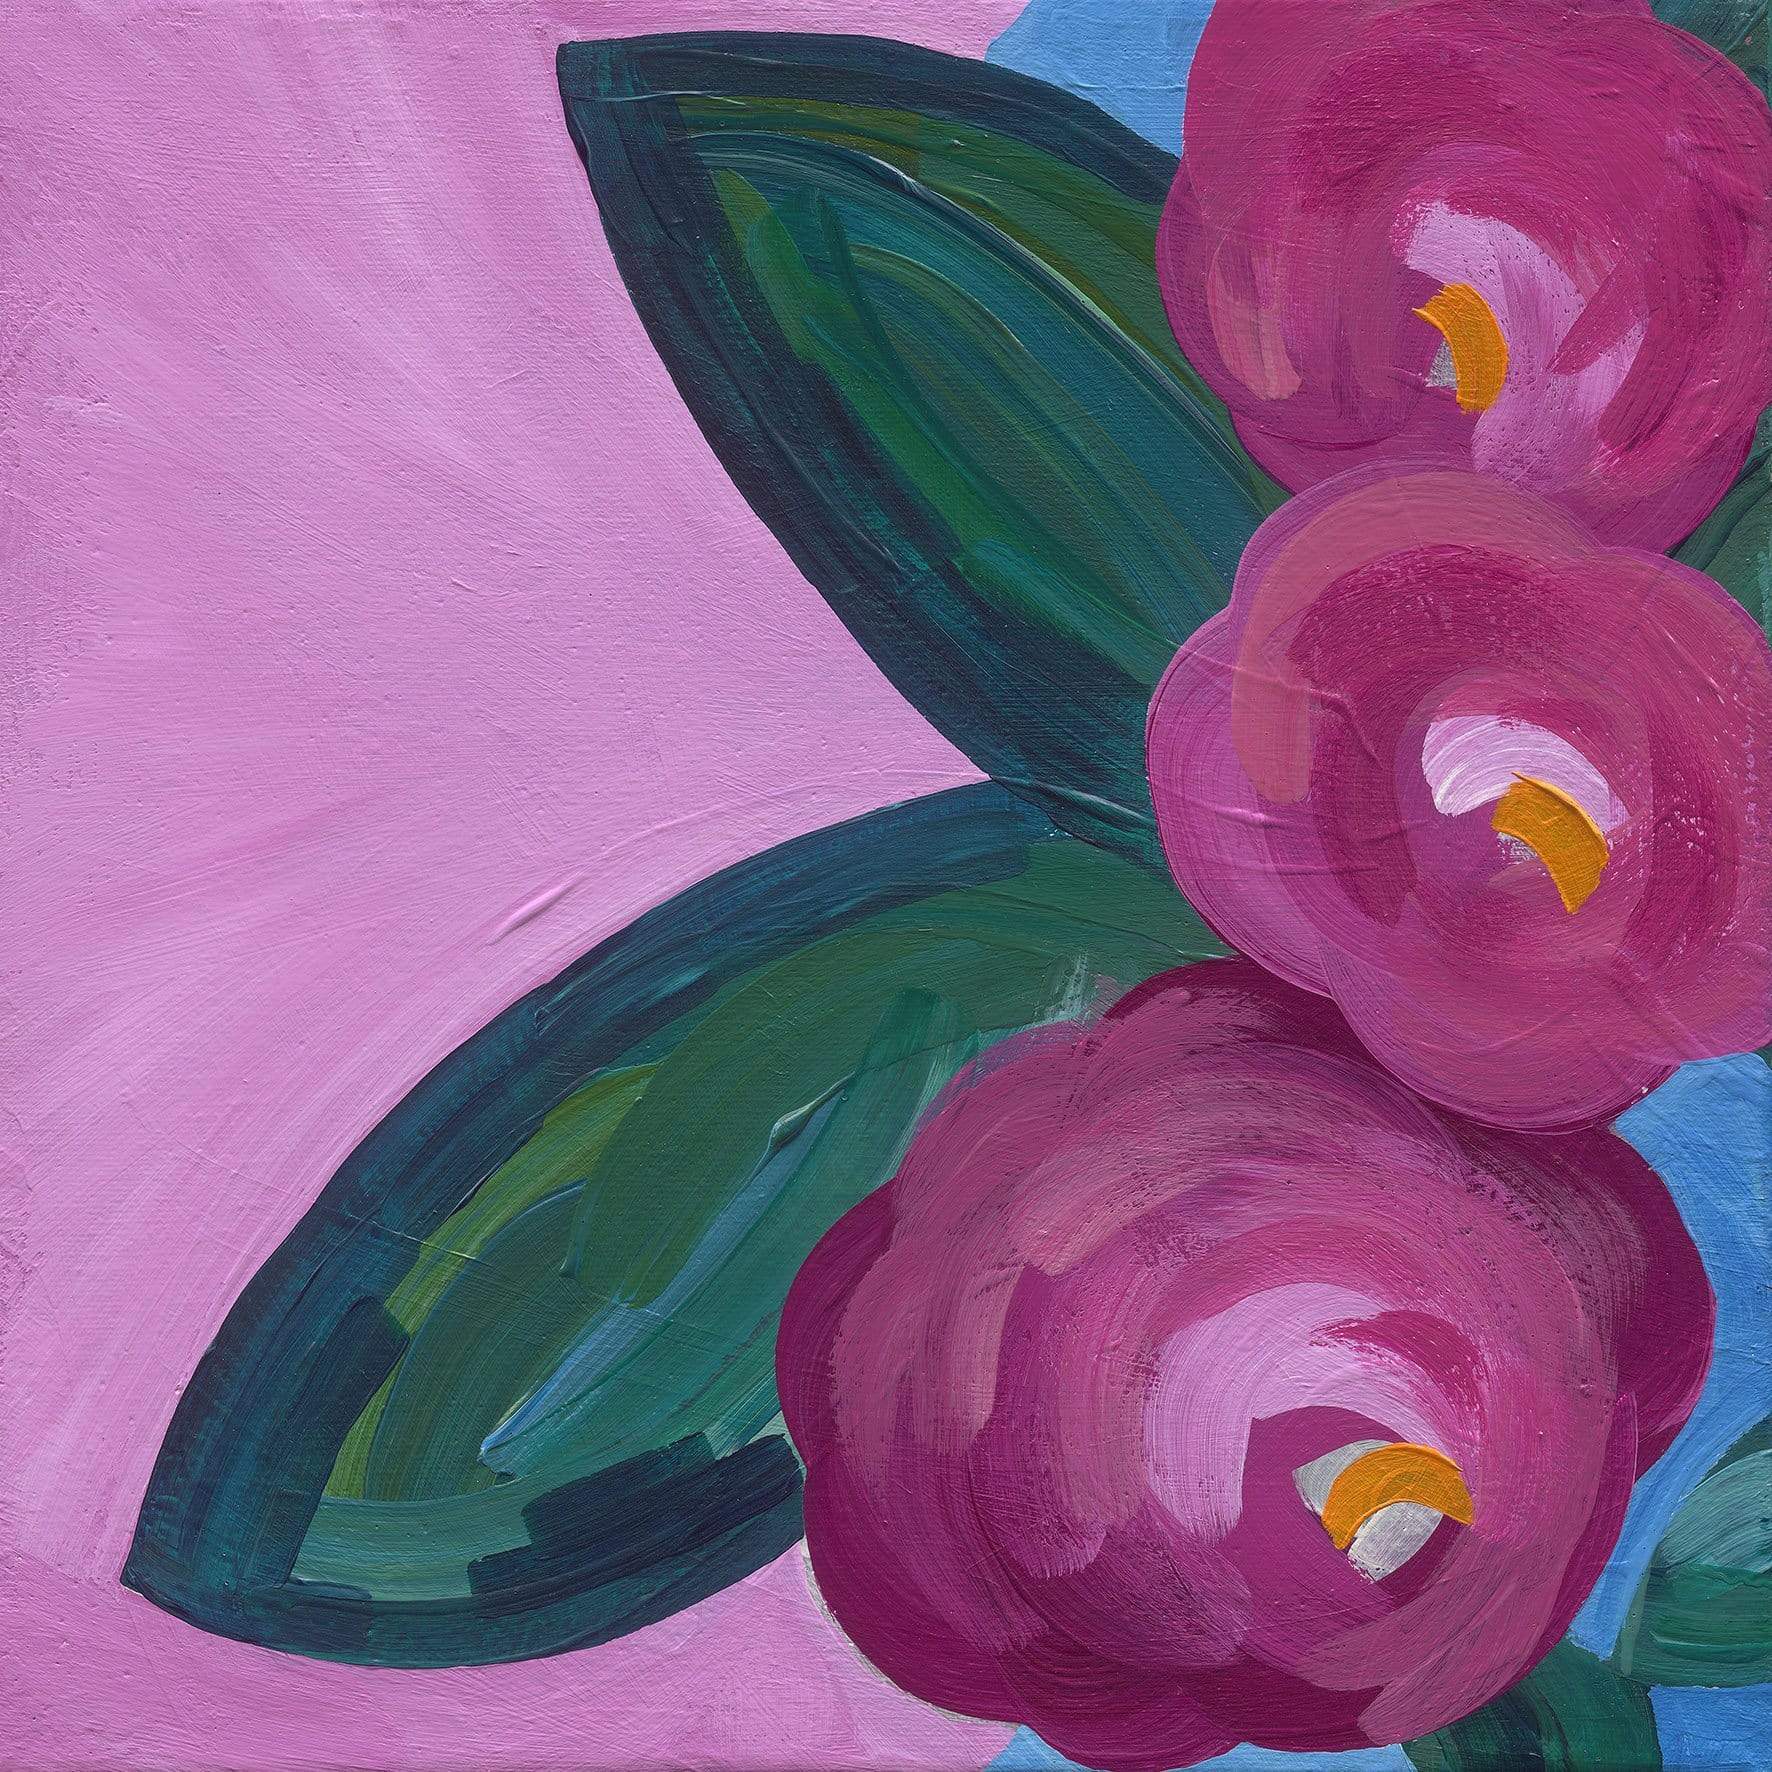 Ros Gervay Creative Giclee Print 19cmW x 19cmH / Unframed with 25mm white border "Pink Blooms" Mini Print